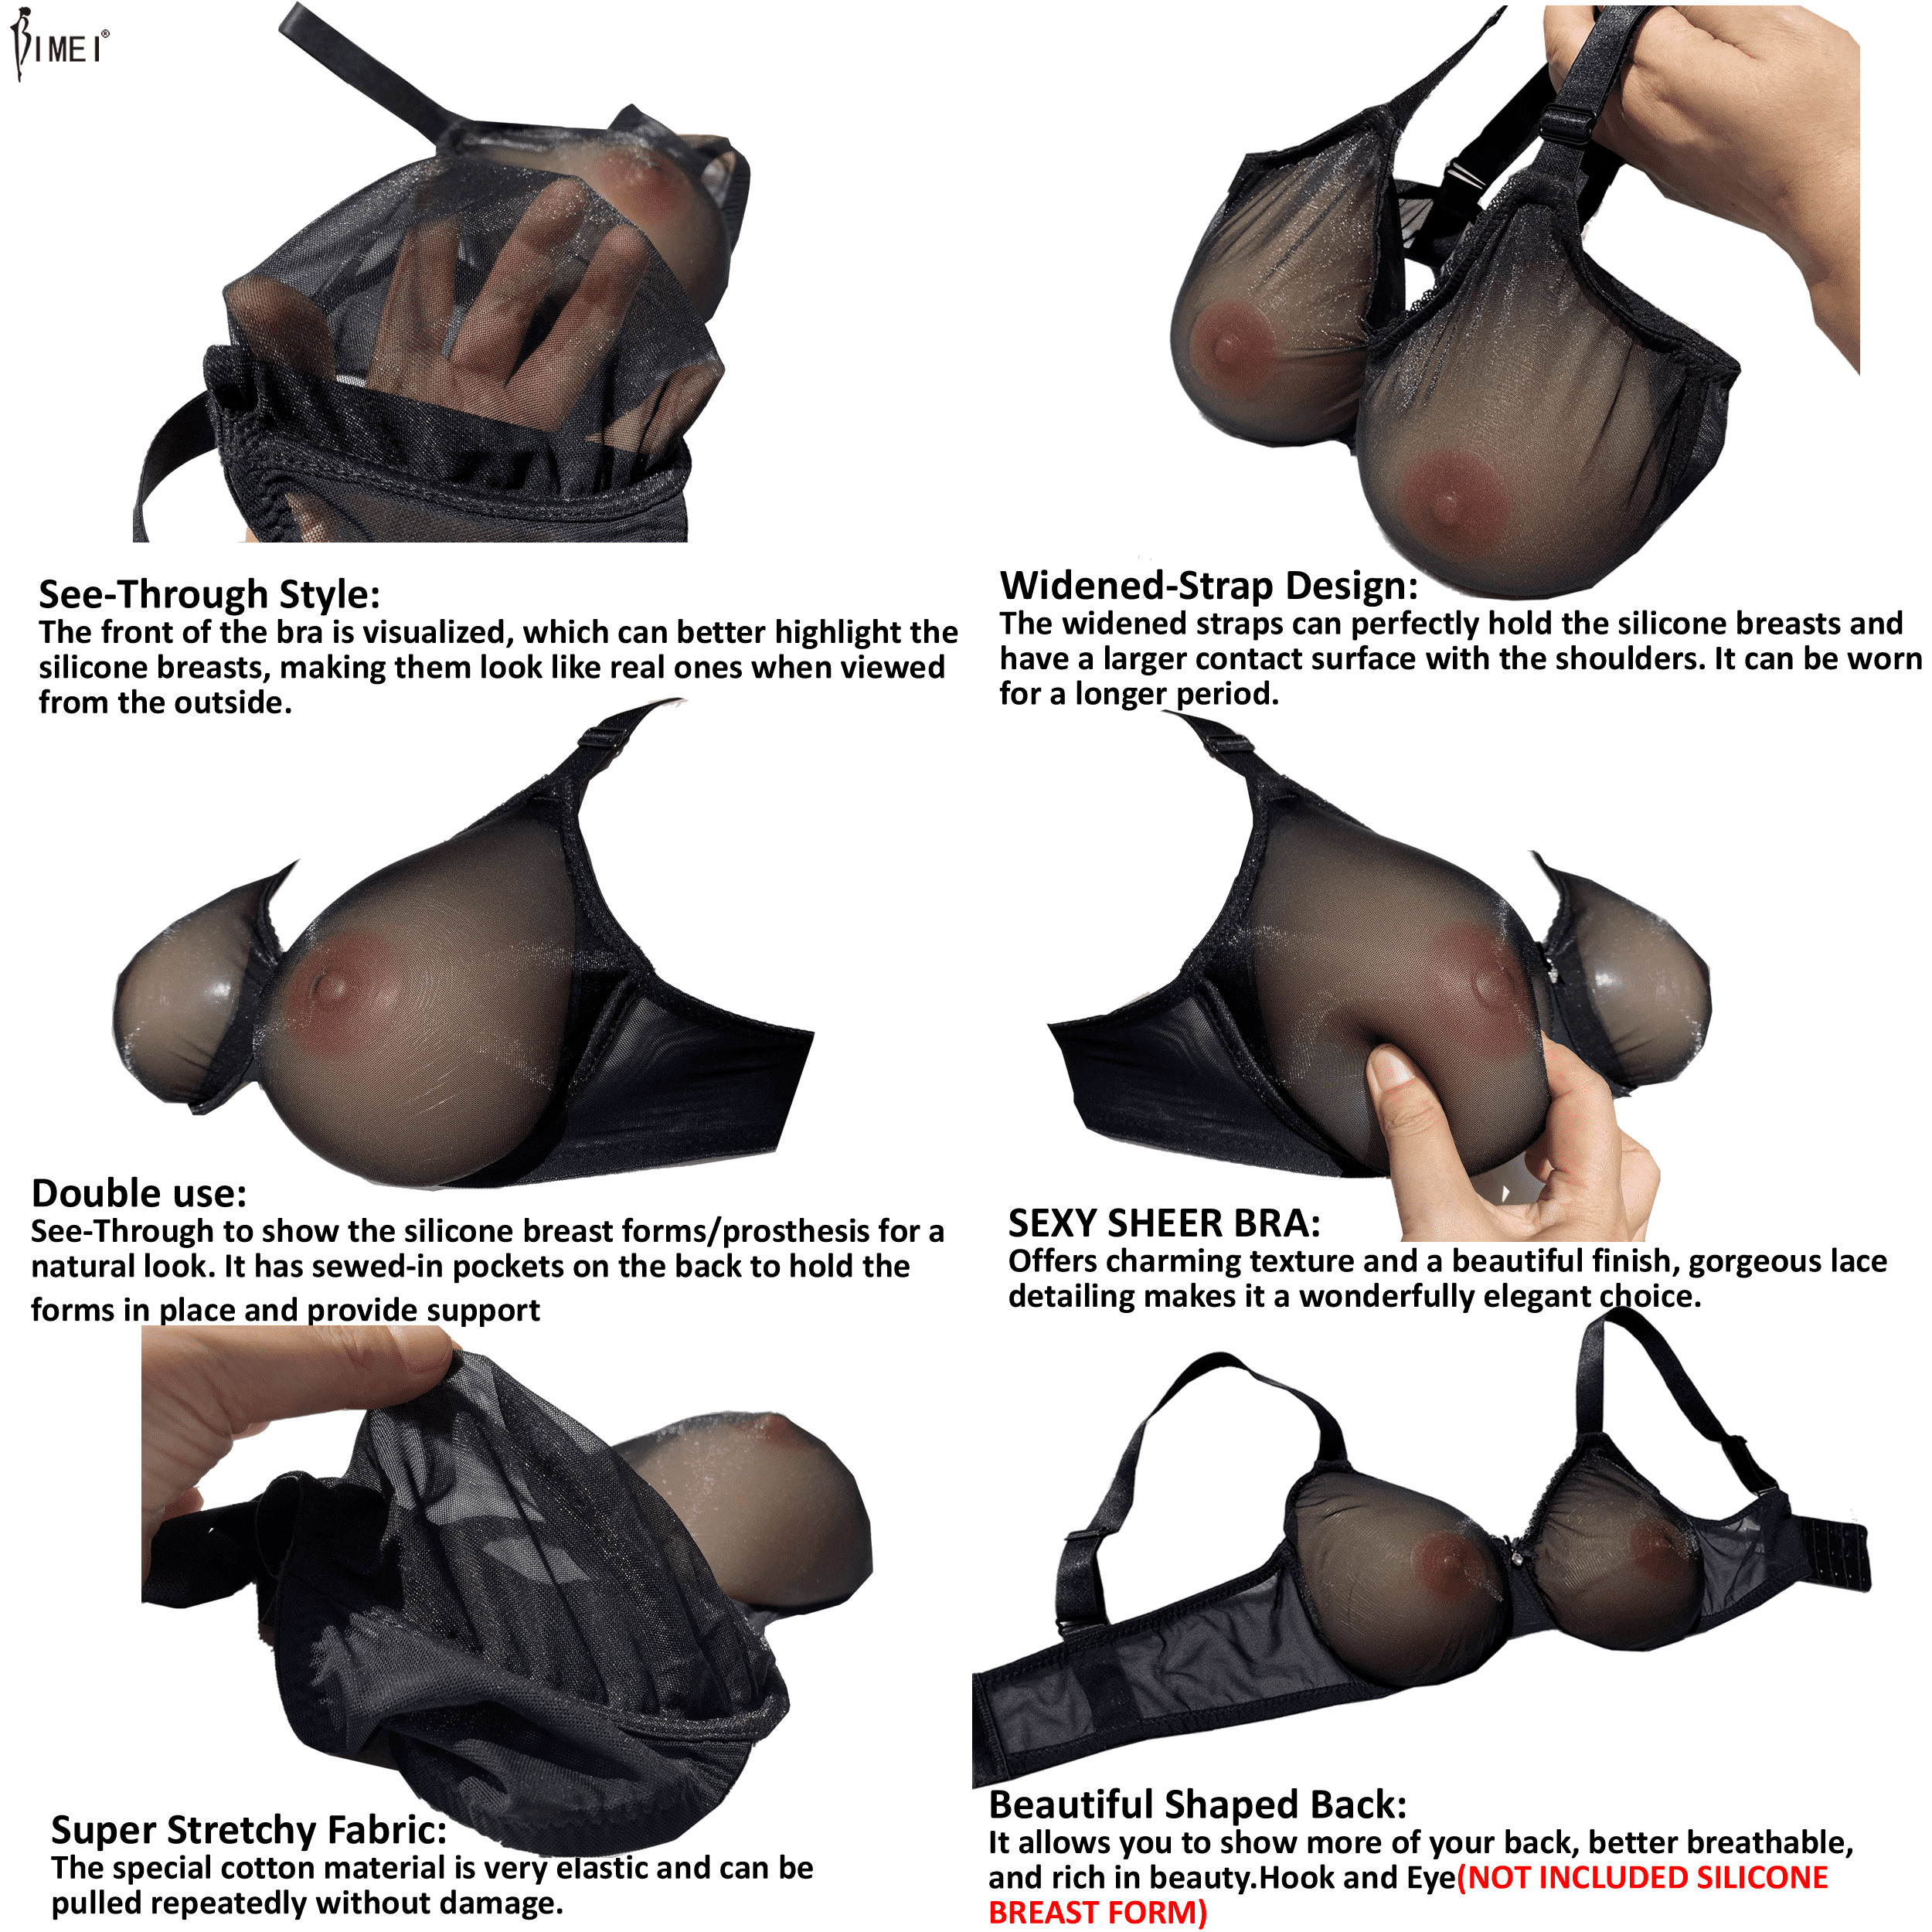 BIMEI See Through Bra CD Mastectomy Lingerie Bra Silicone Breast Forms  Prosthesis Pocket Bra with Steel Ring 9008,Black,42B 